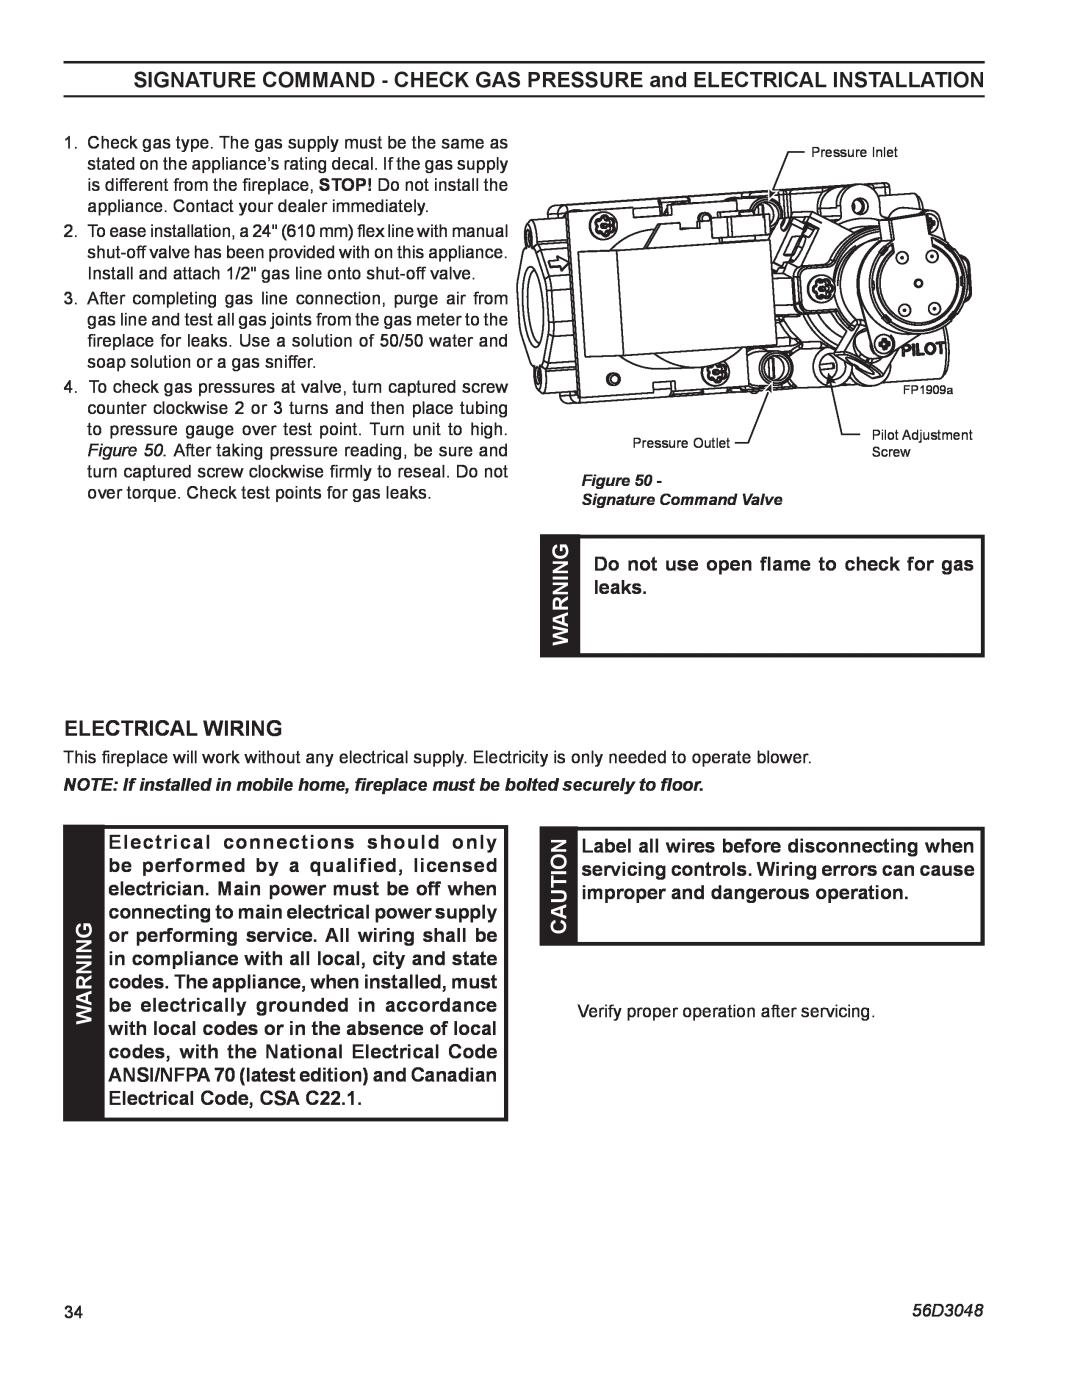 Monessen Hearth HDV500NV/PV manual Electrical Wiring, Do not use open flame to check for gas leaks 